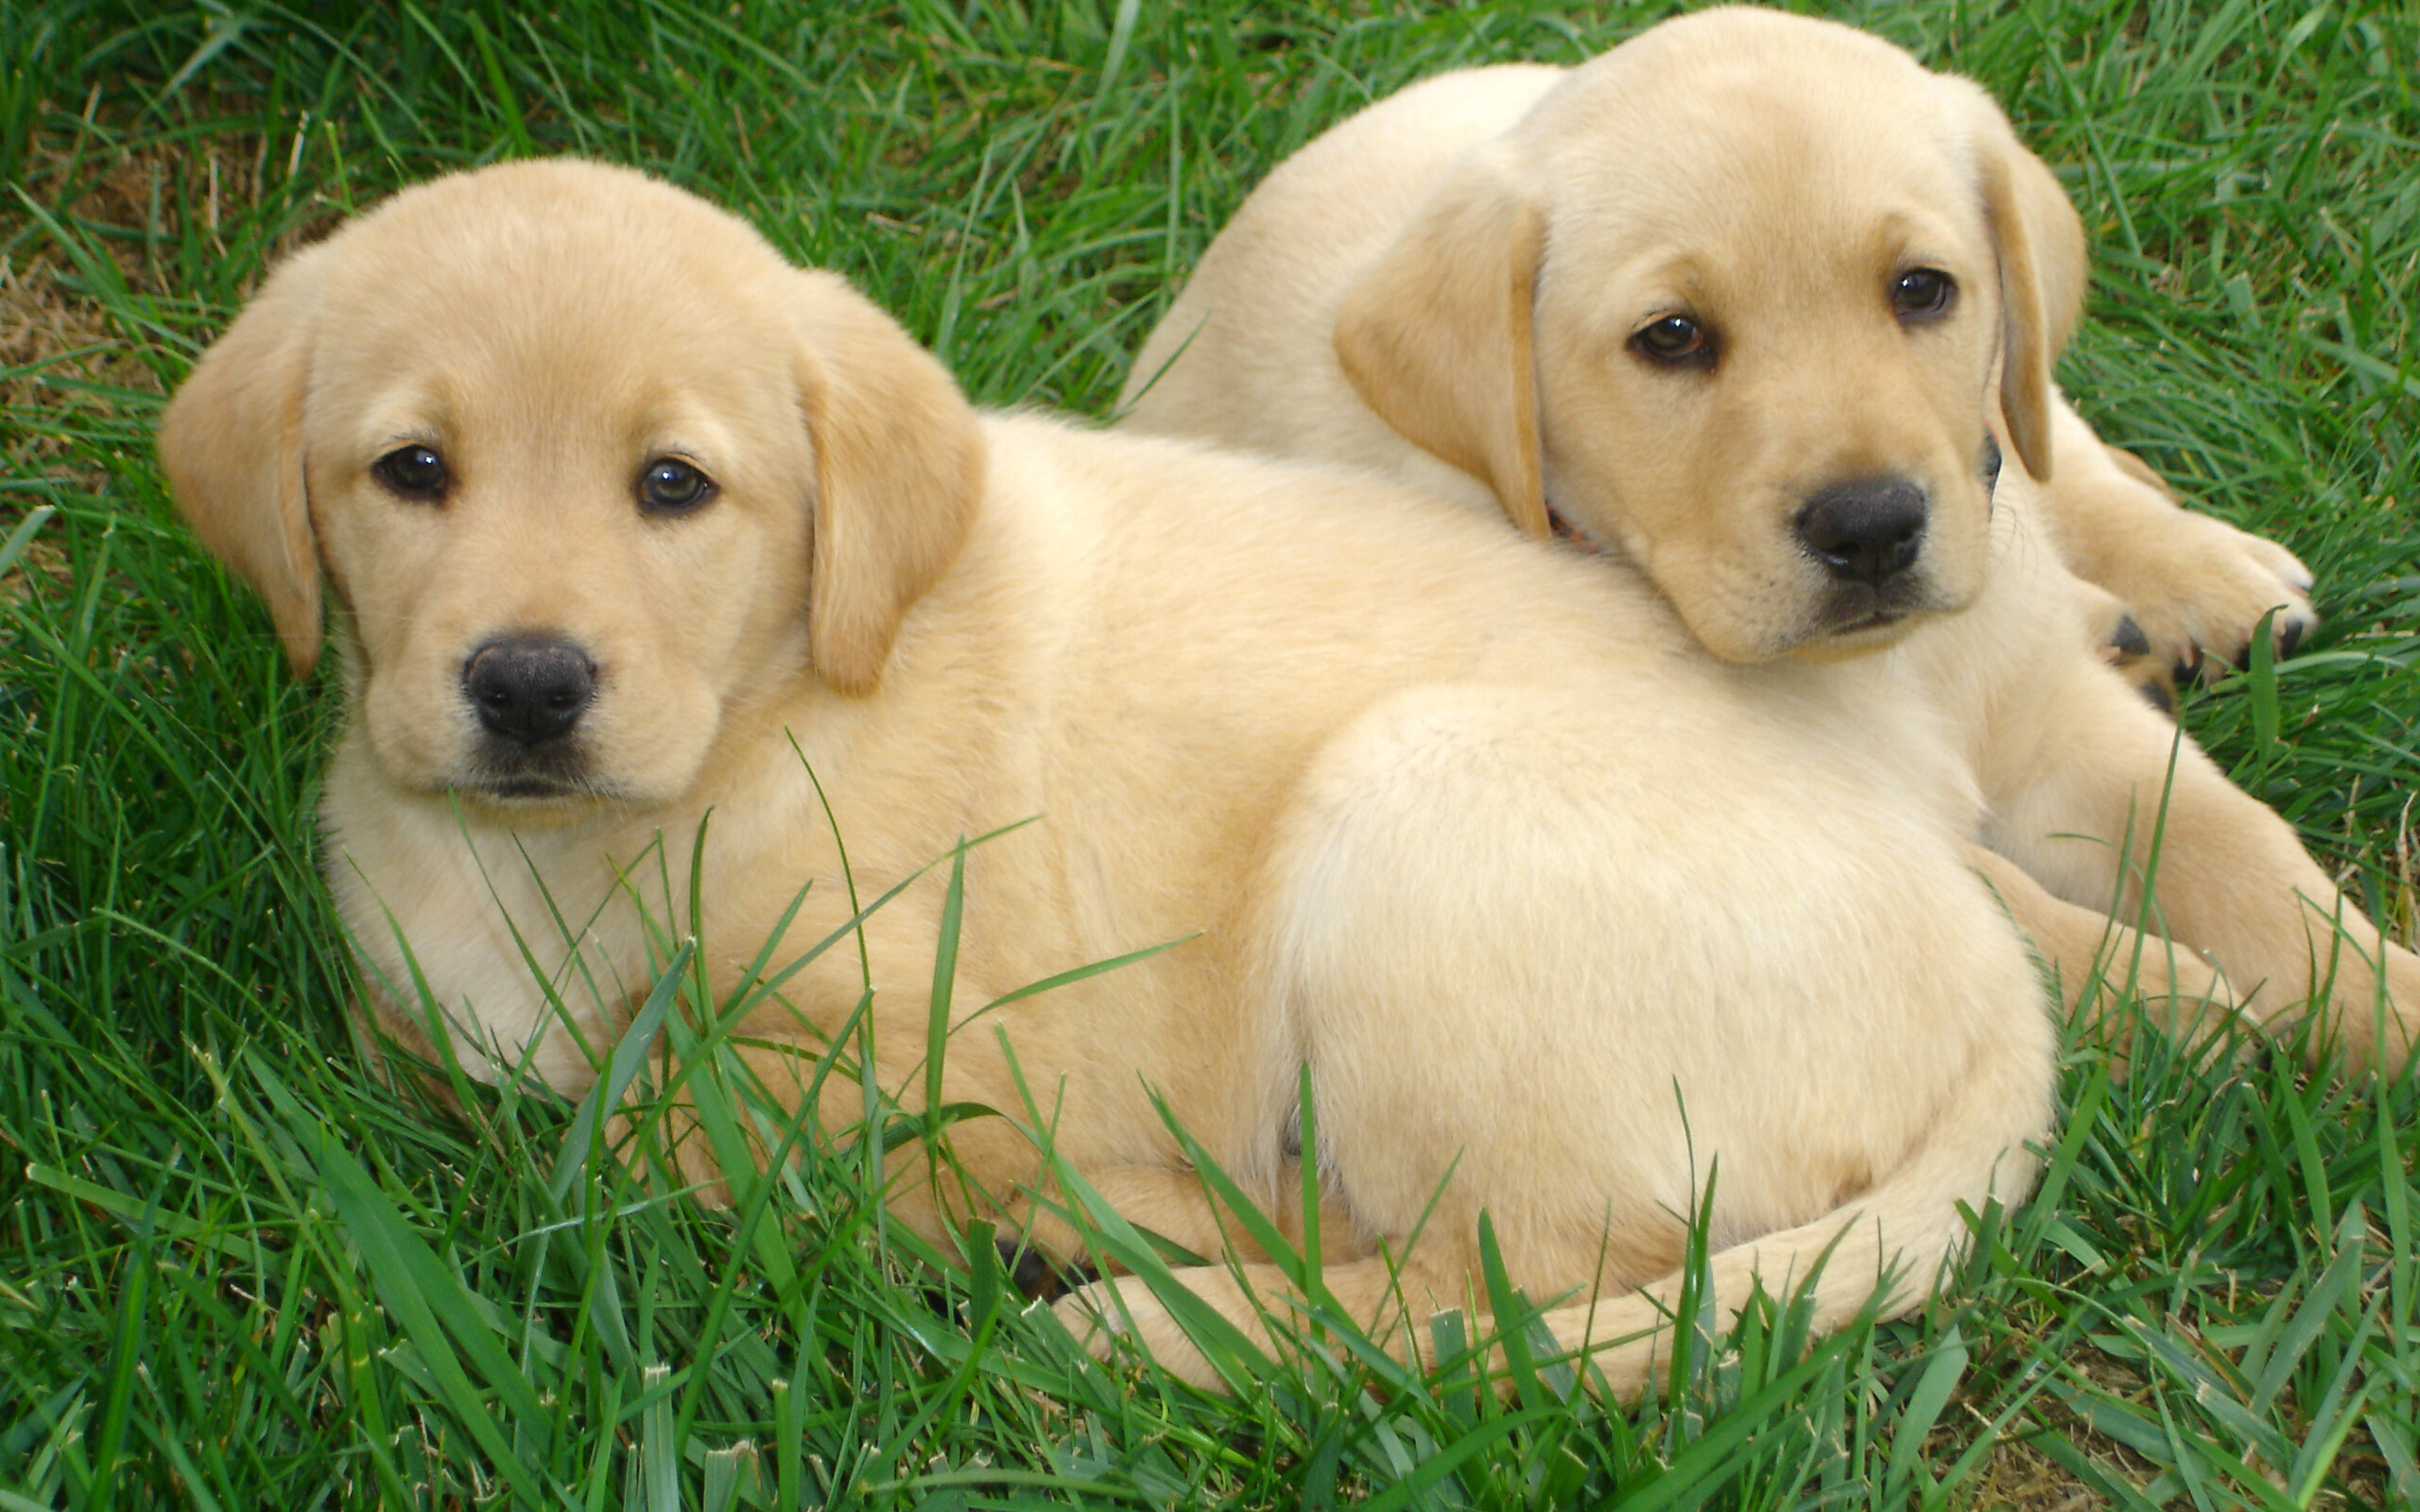 Labrador Retriever: The breed has proven to have a high success rate at becoming guide dogs. 2560x1600 HD Wallpaper.